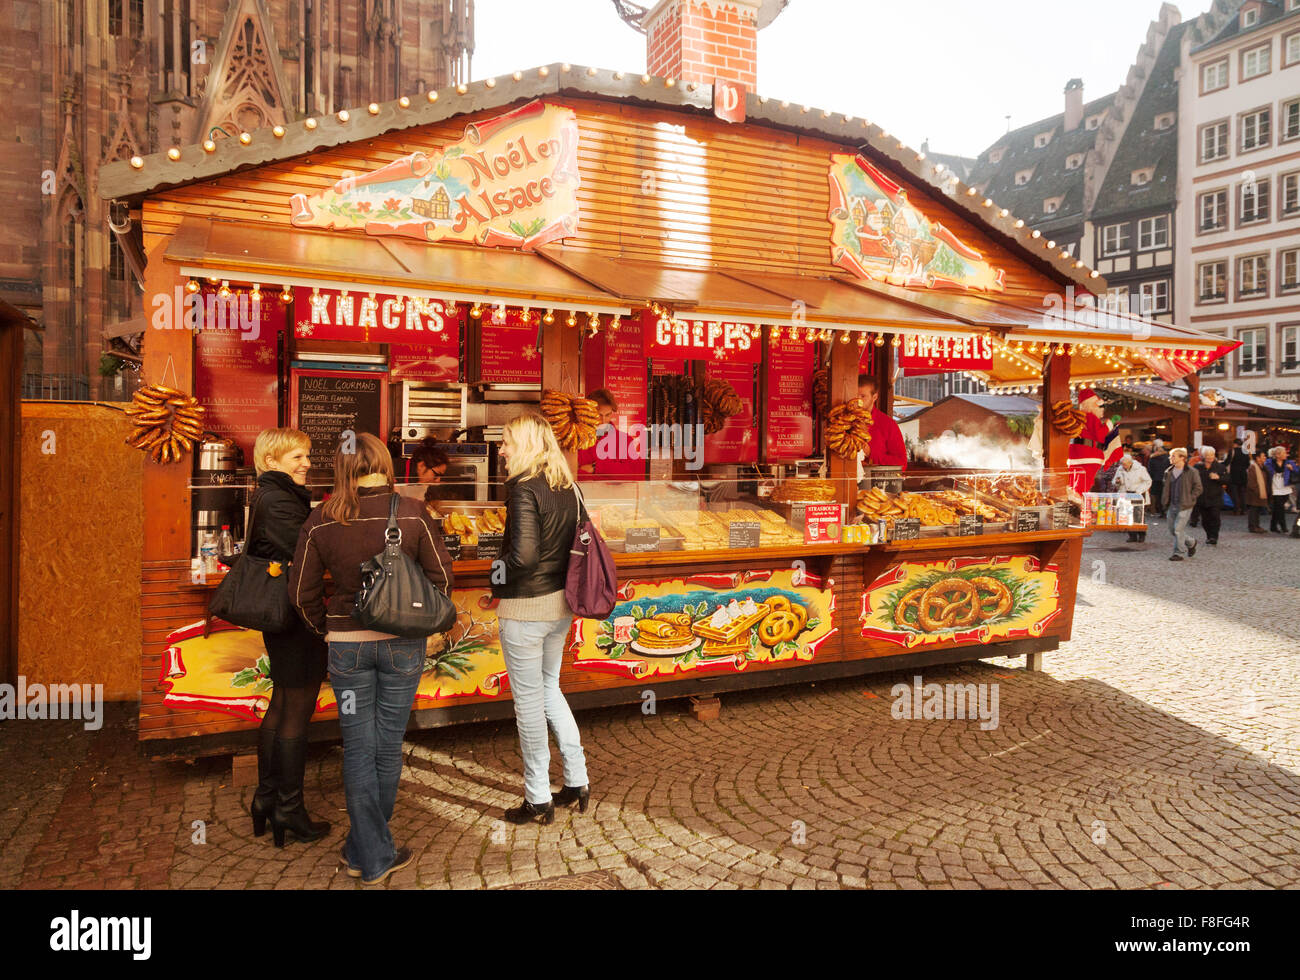 Christmas market stall selling food by the cathedral, Strasbourg Christmas market, Alsace France Europe Stock Photo